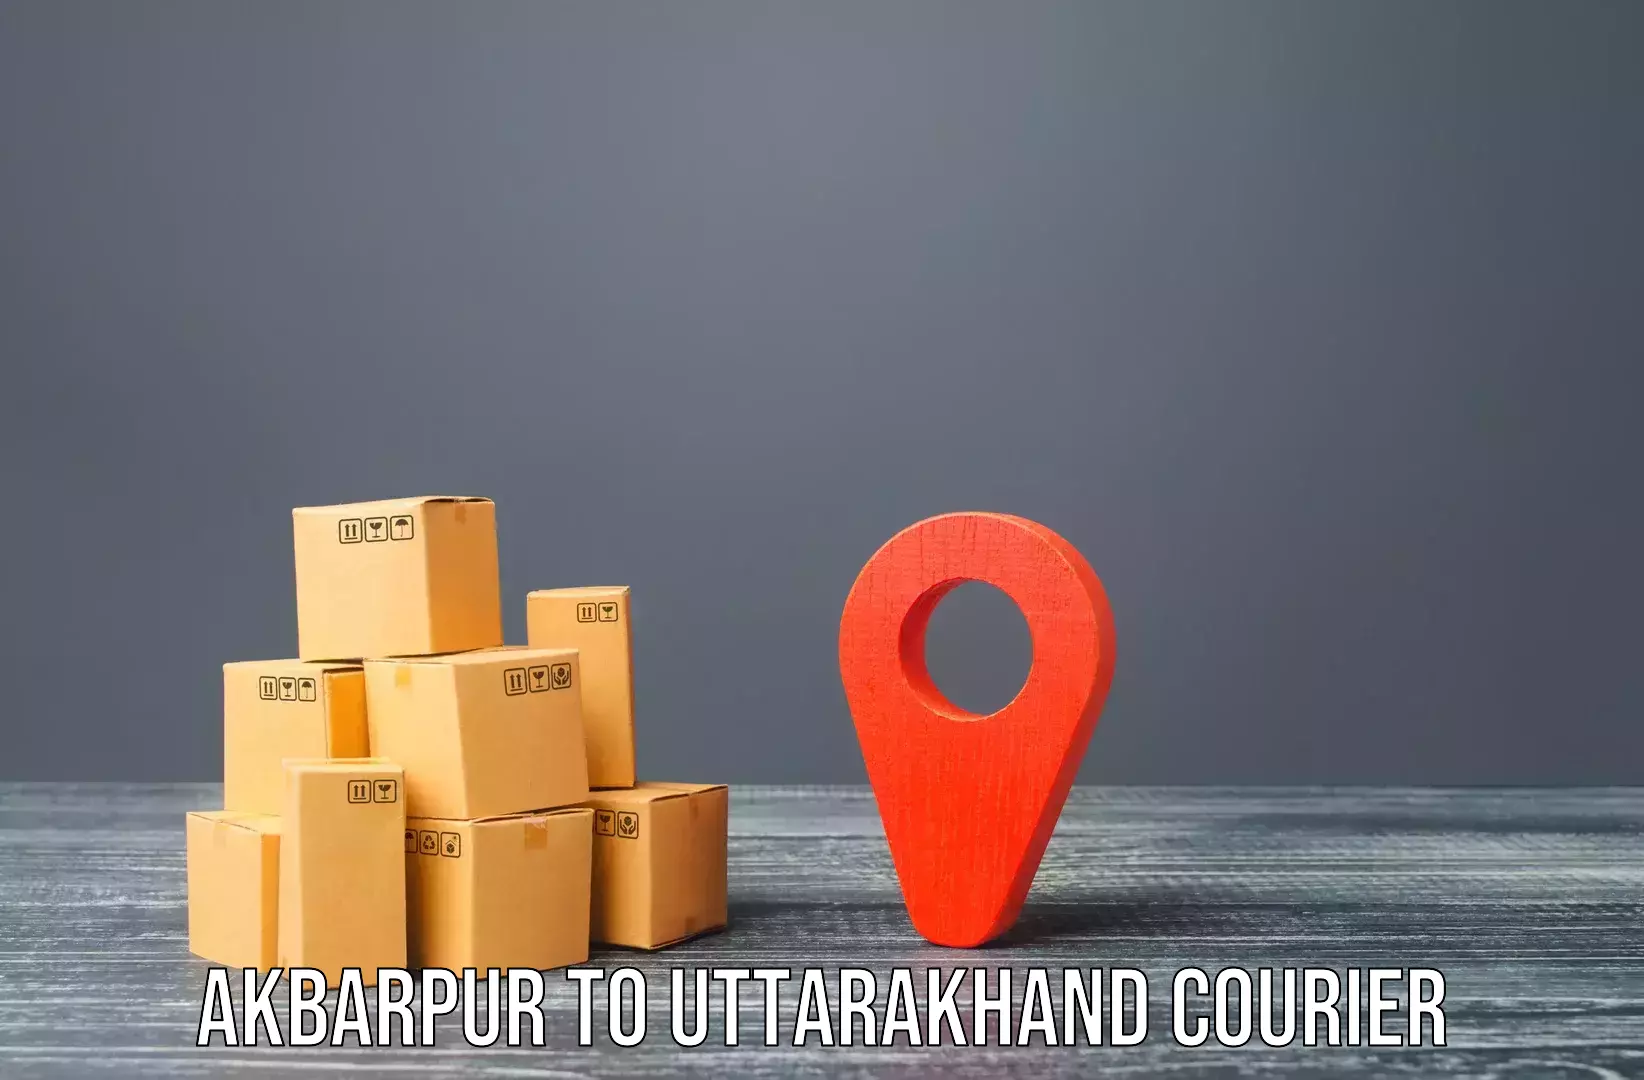 Trusted relocation experts Akbarpur to Haridwar